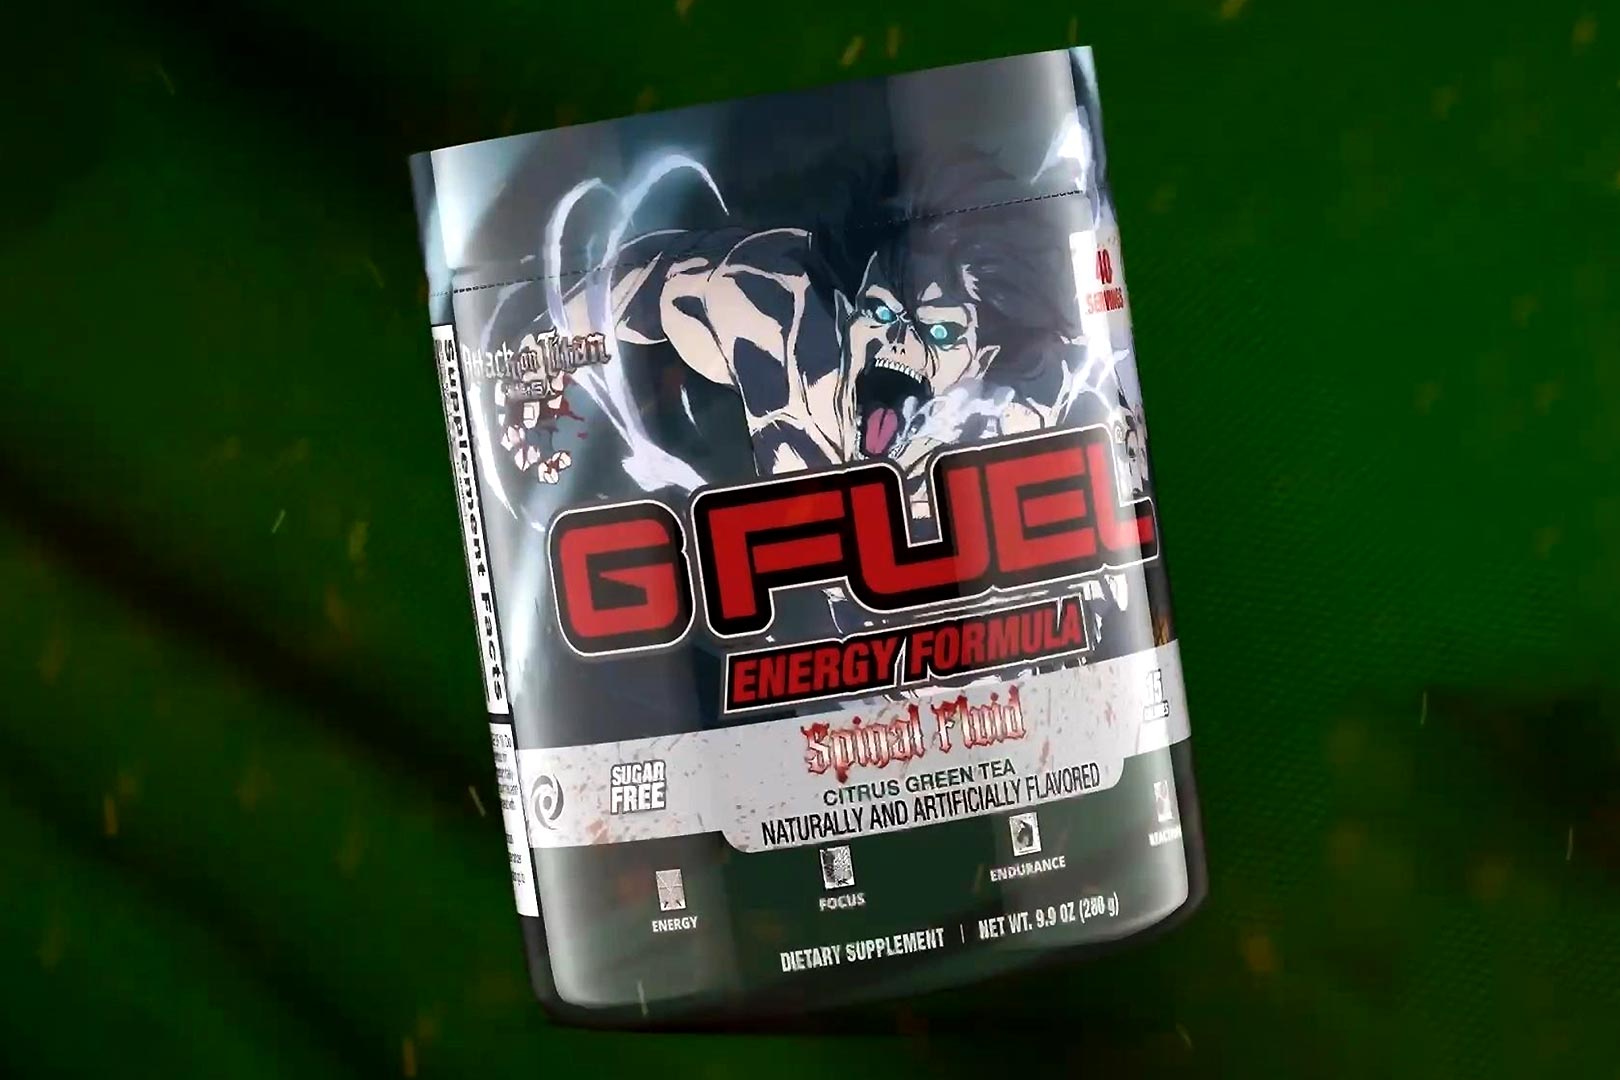 gfuel-attack-on-titan-energy-drink-shaker-cup - Anime Trending